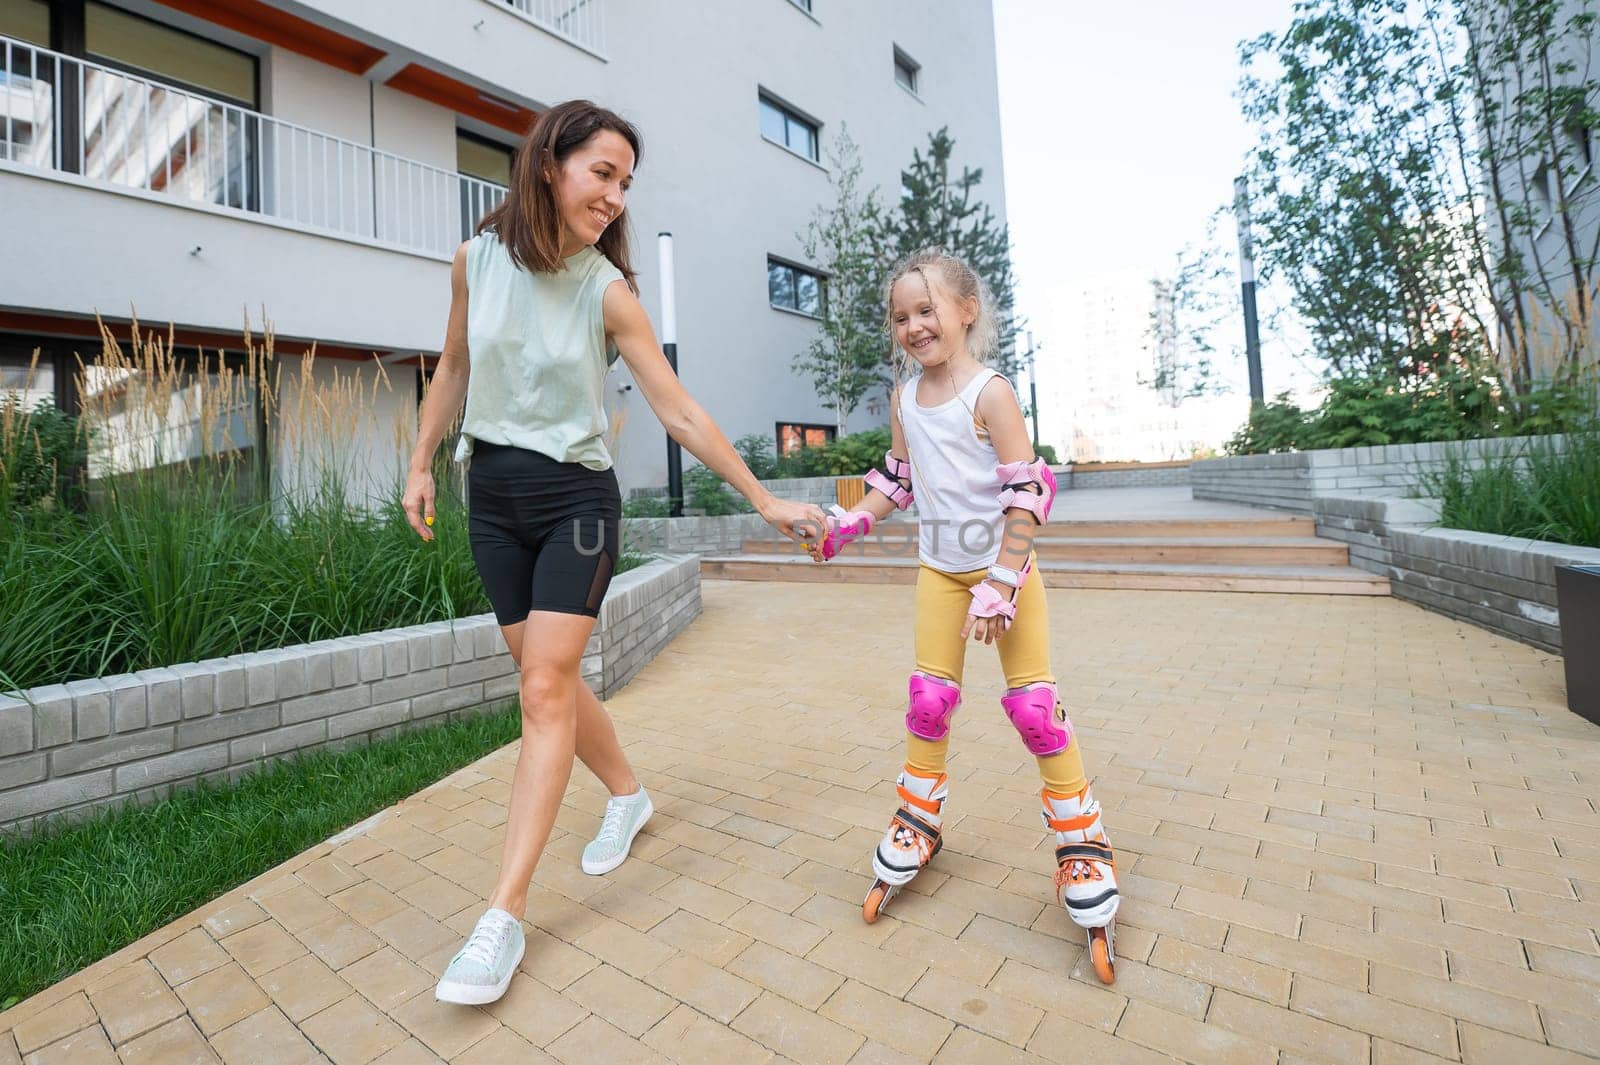 Mother helps daughter learn to roller skate. by mrwed54